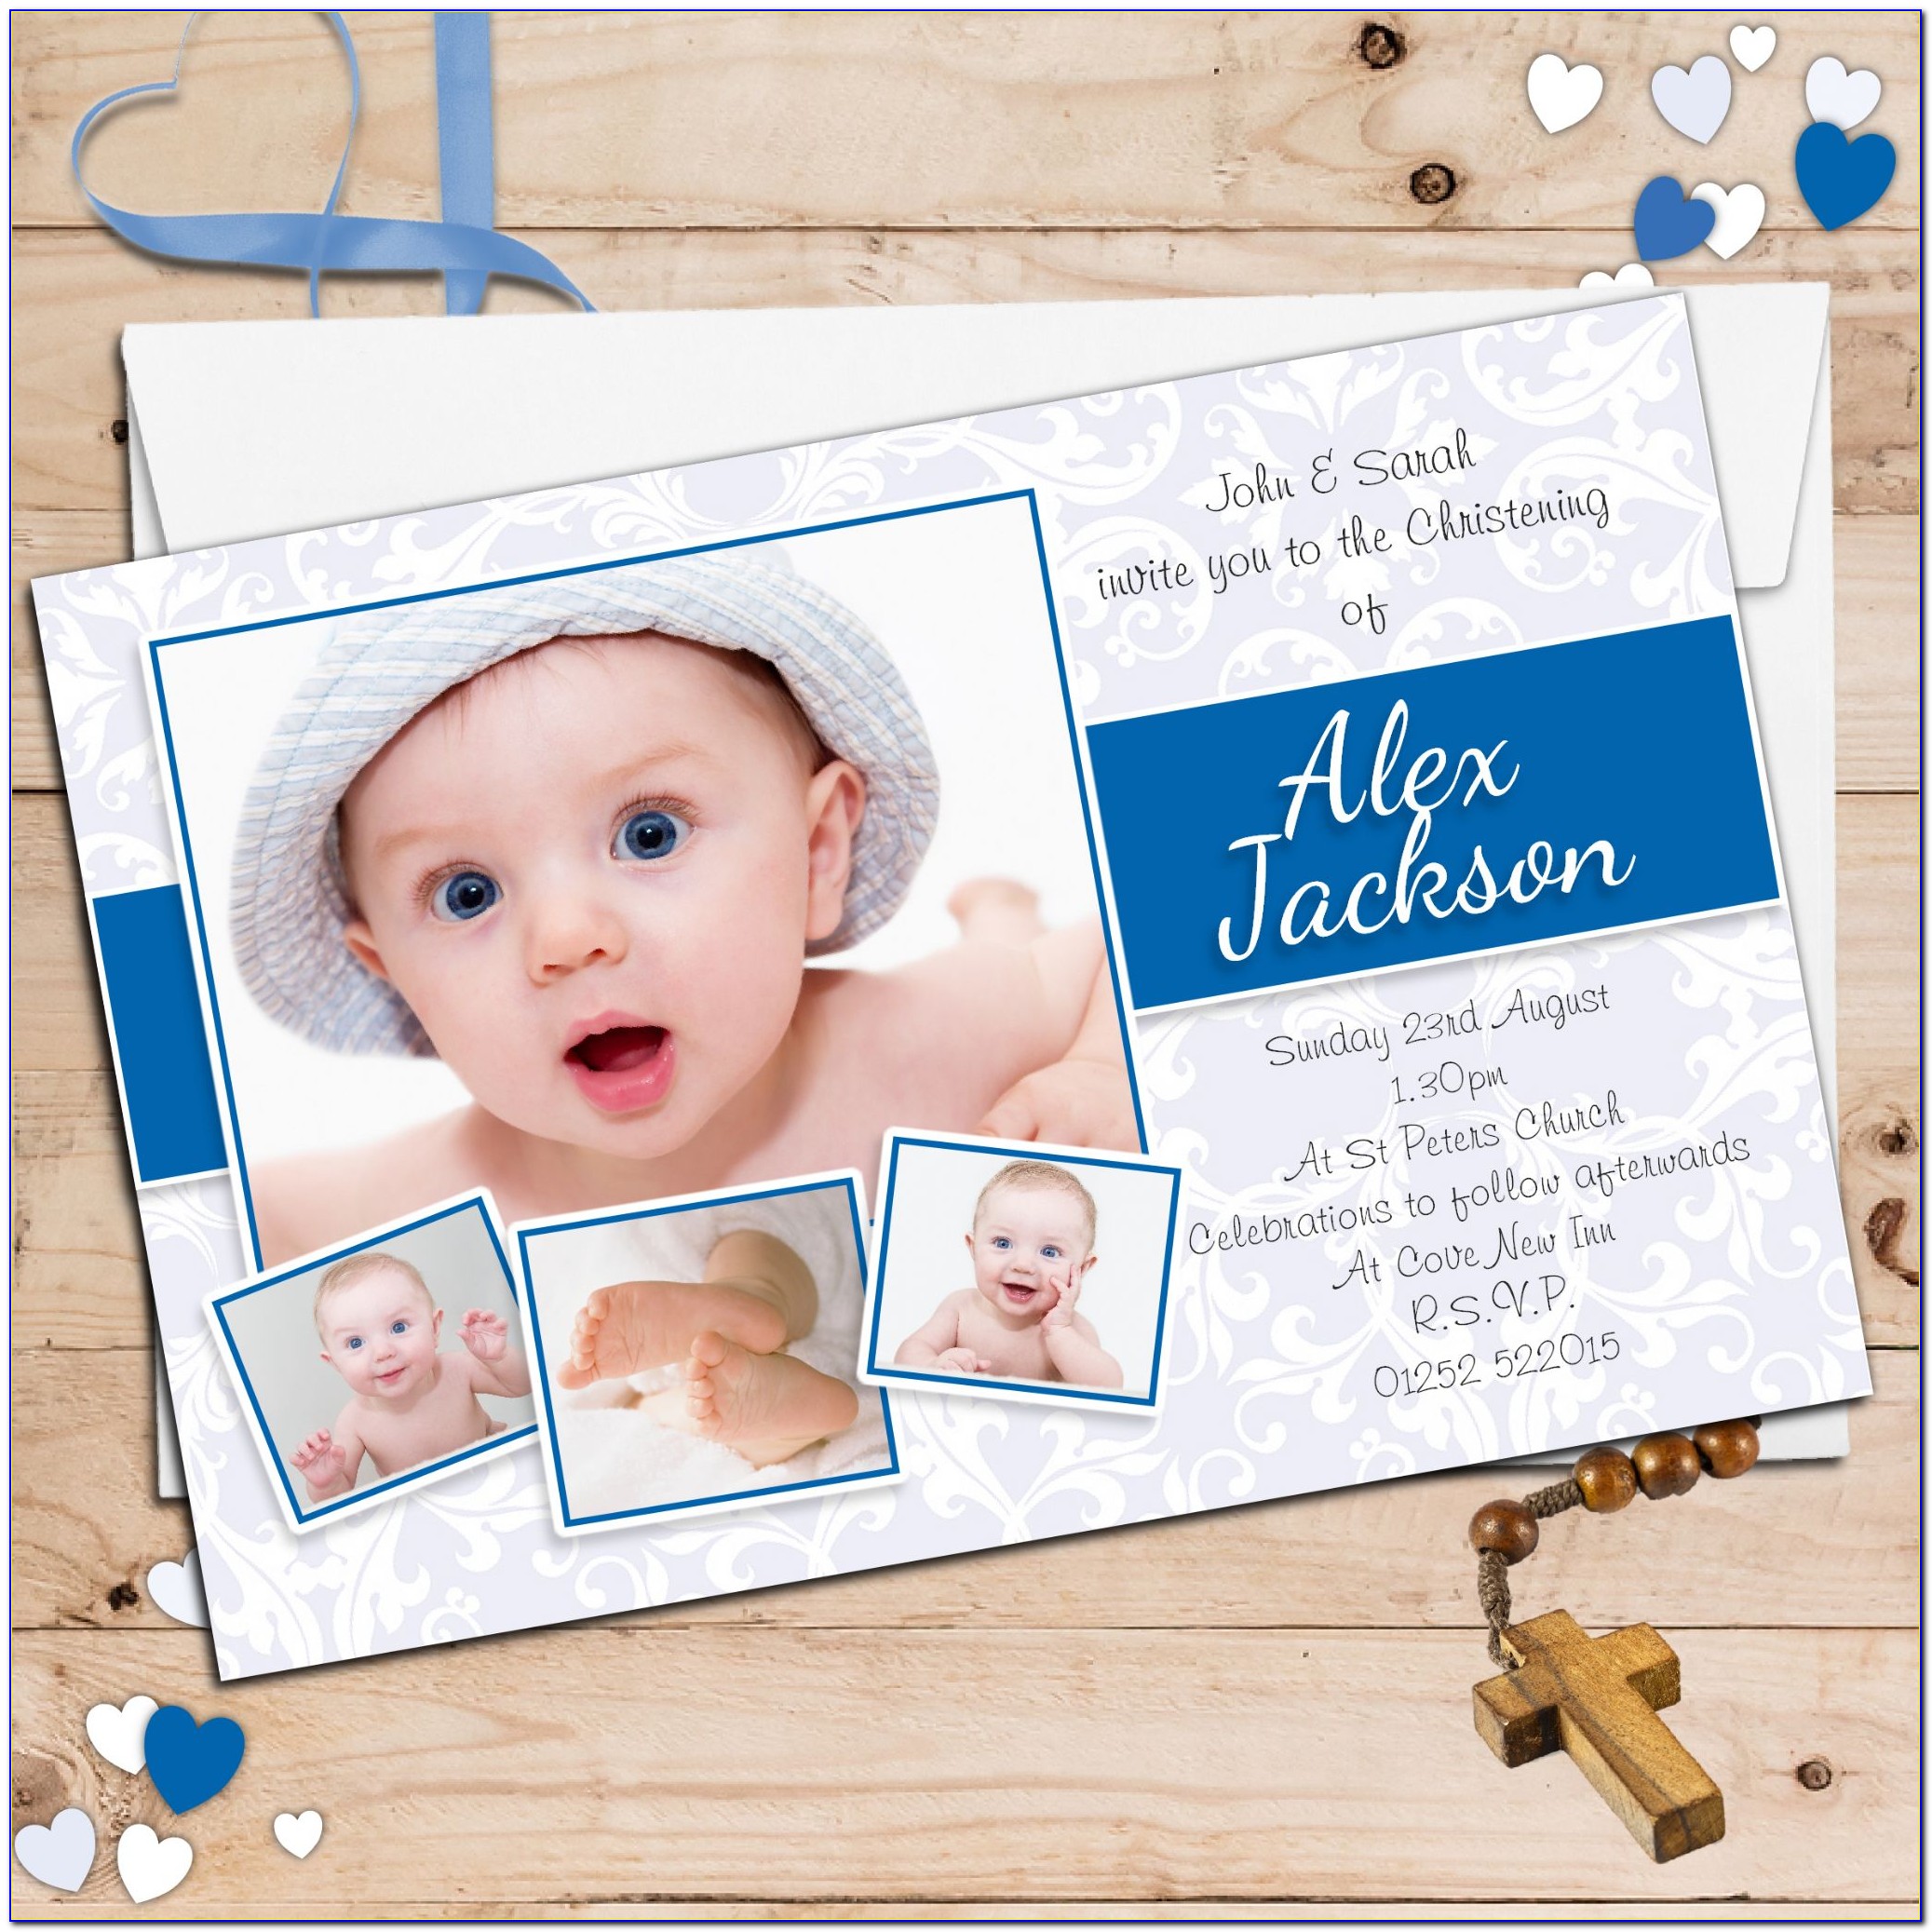 Invitation Card For 1st Birthday Party Of Baby Boy